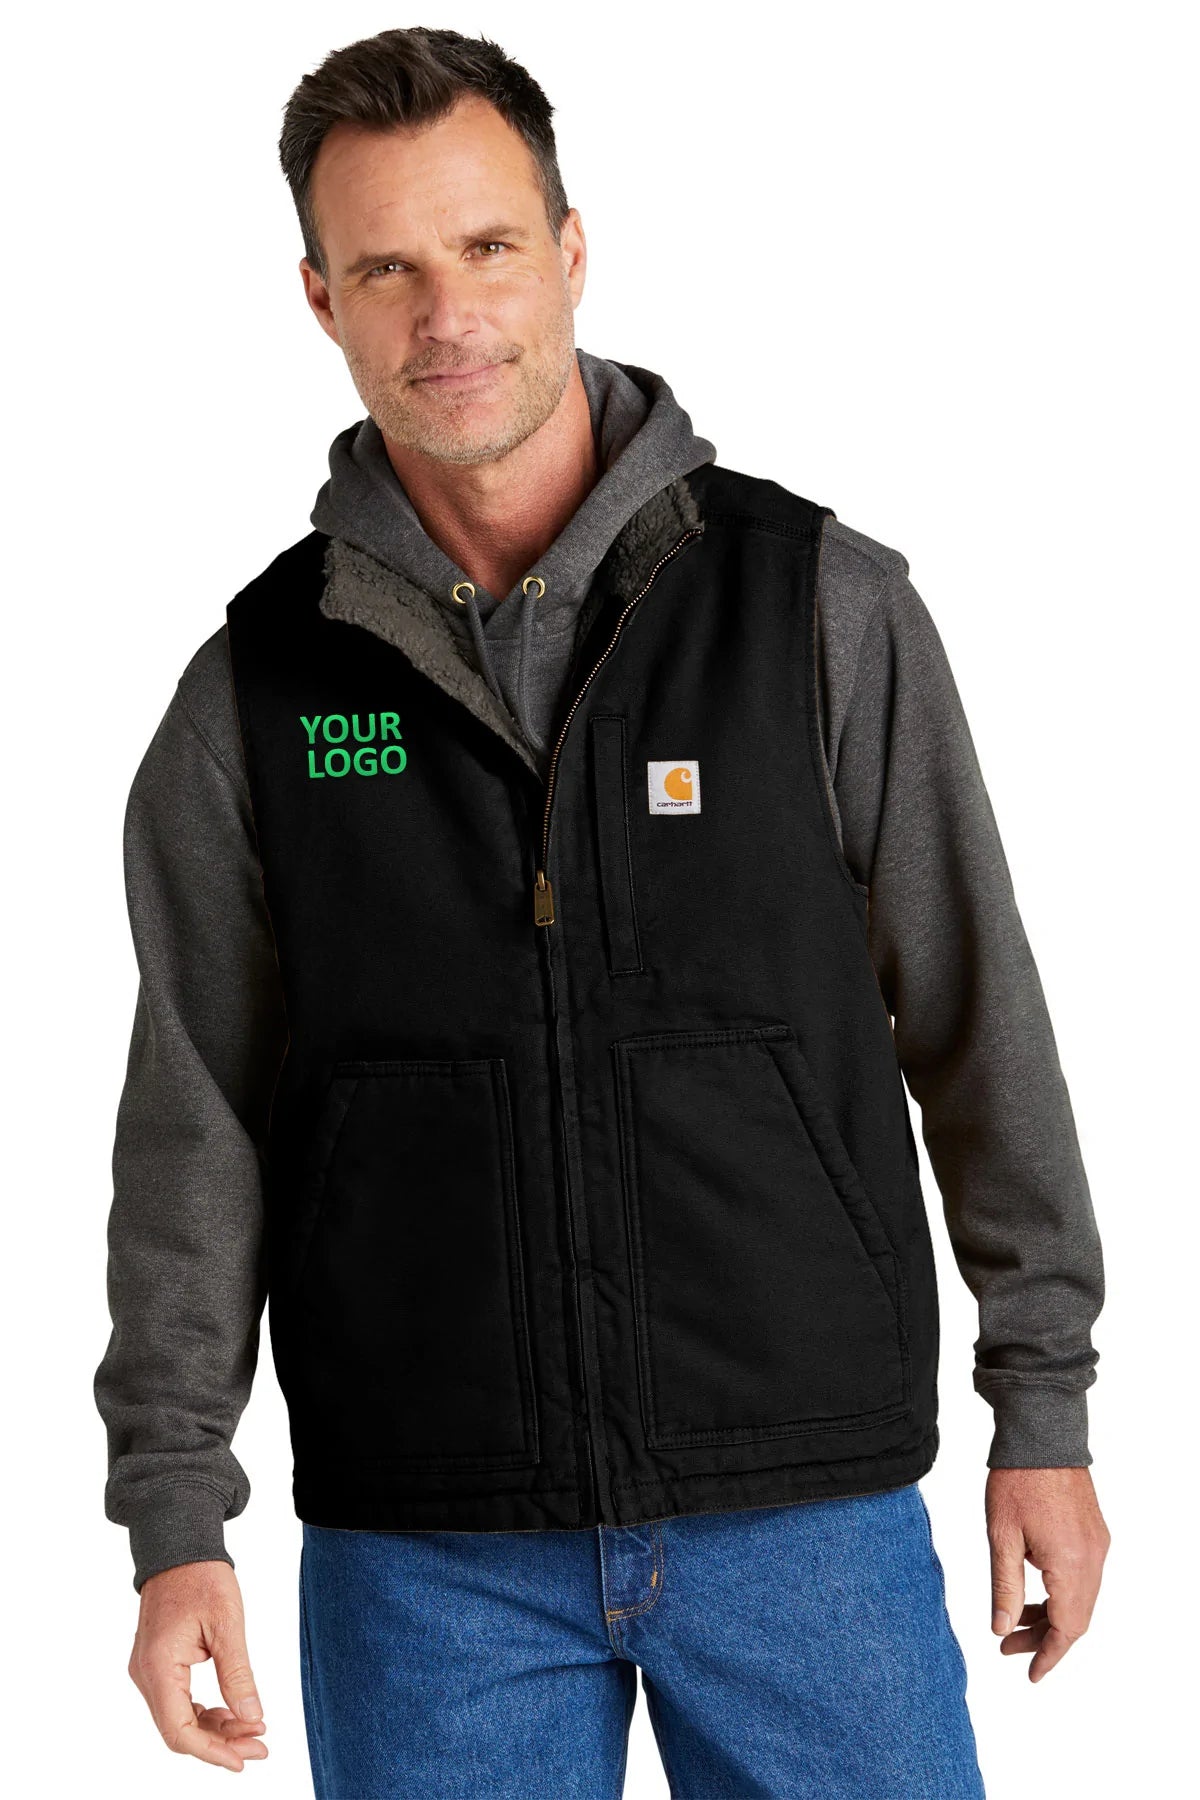 Carhartt CT104277 S Black CT104277 company embroidered jackets